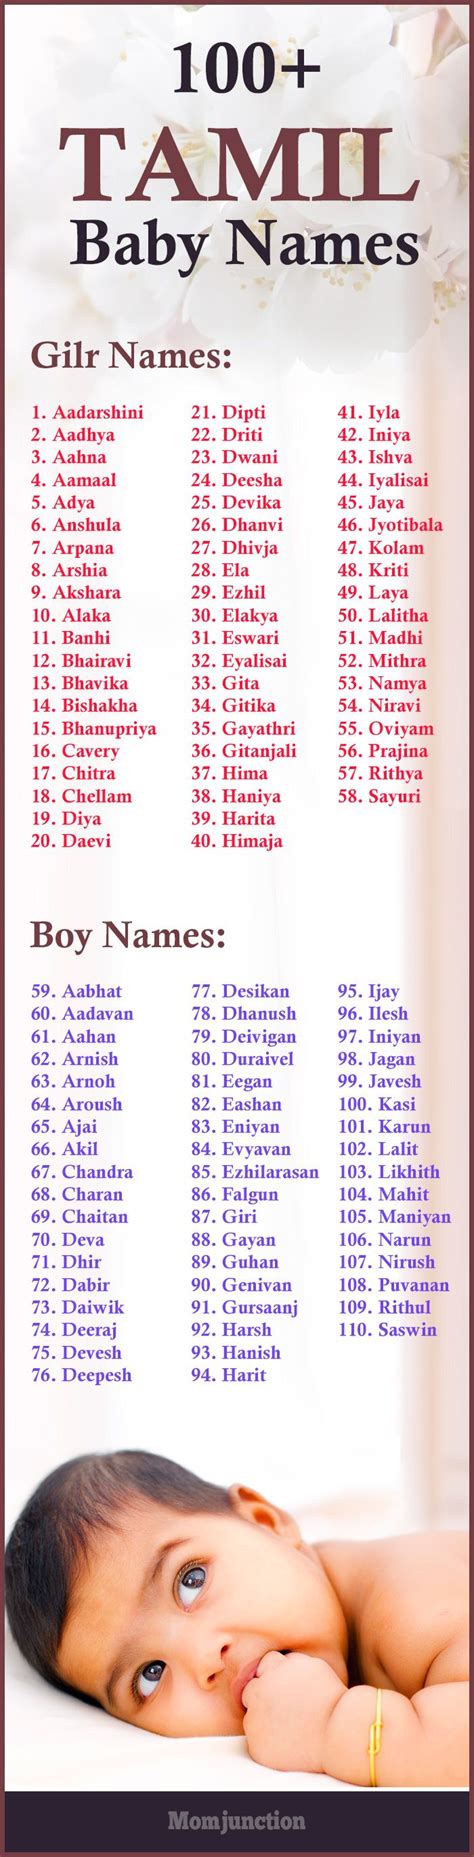 135 Modern Tamil Baby Names For Girls And Boys Tamil Baby Names